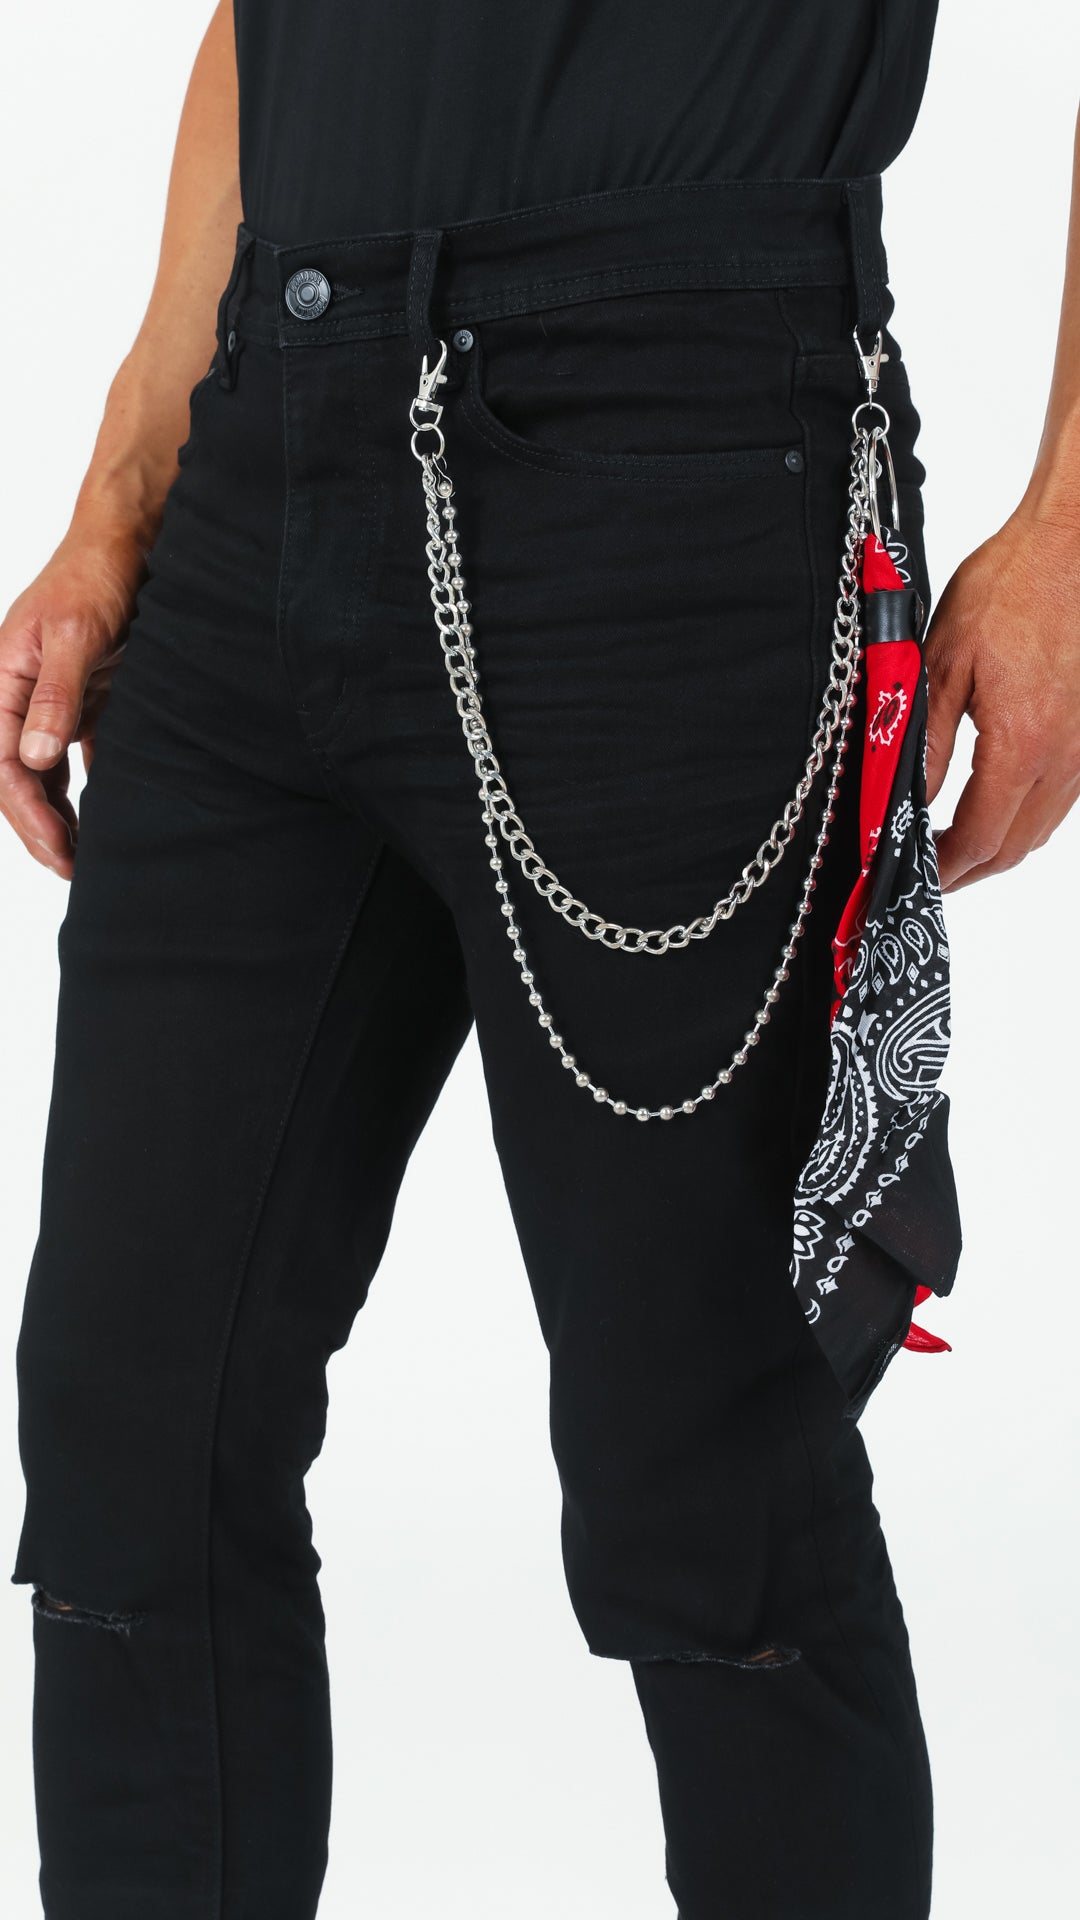 Midnight Denim Pant with Removable Bandana Wallet Chain